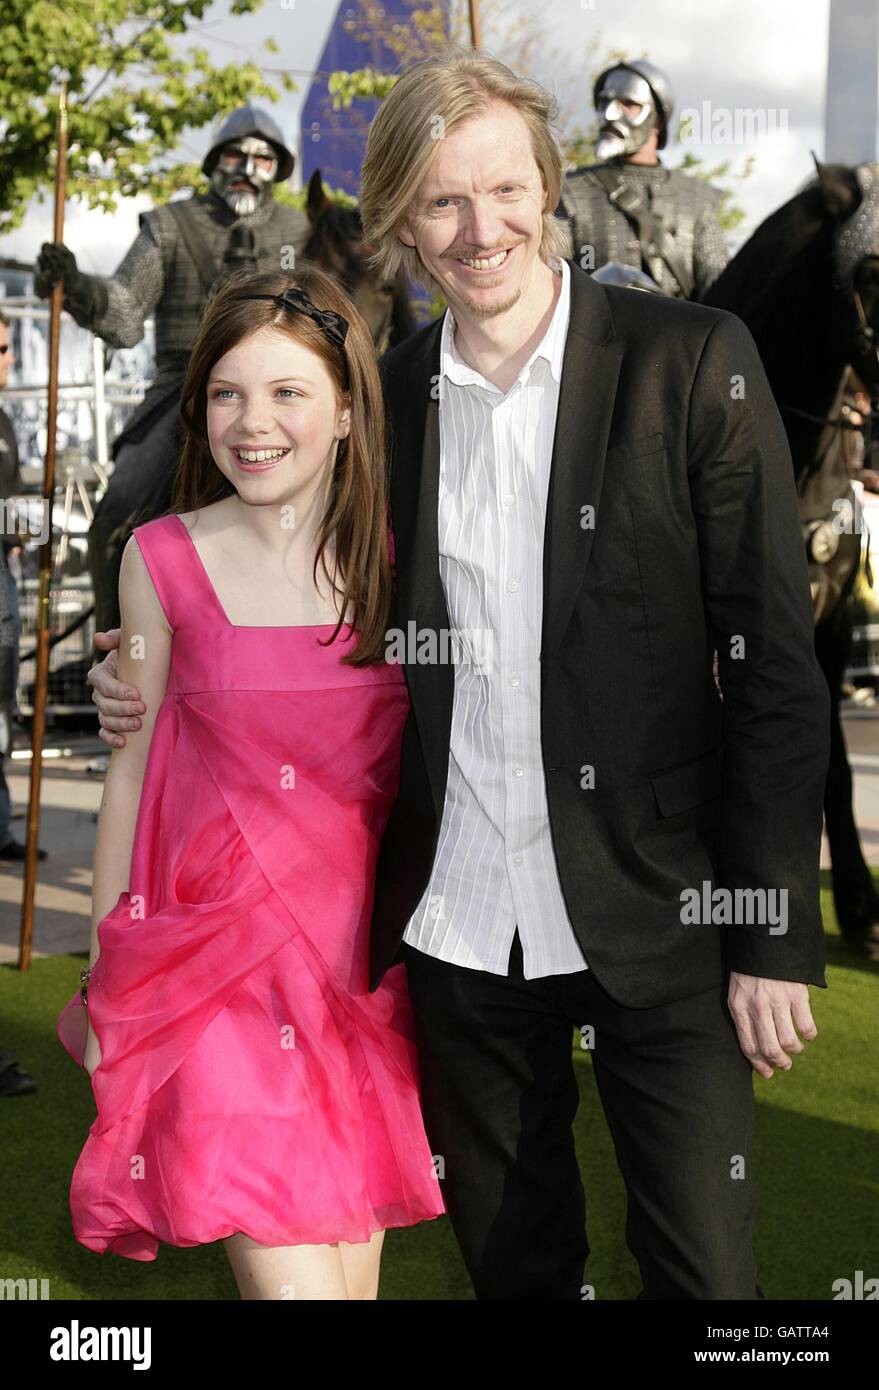 Andrew Adamson and Georgie Henley arrives for the screening of The Chronicles of Narnia: Prince Caspian at the O2 Arena in London. Stock Photo